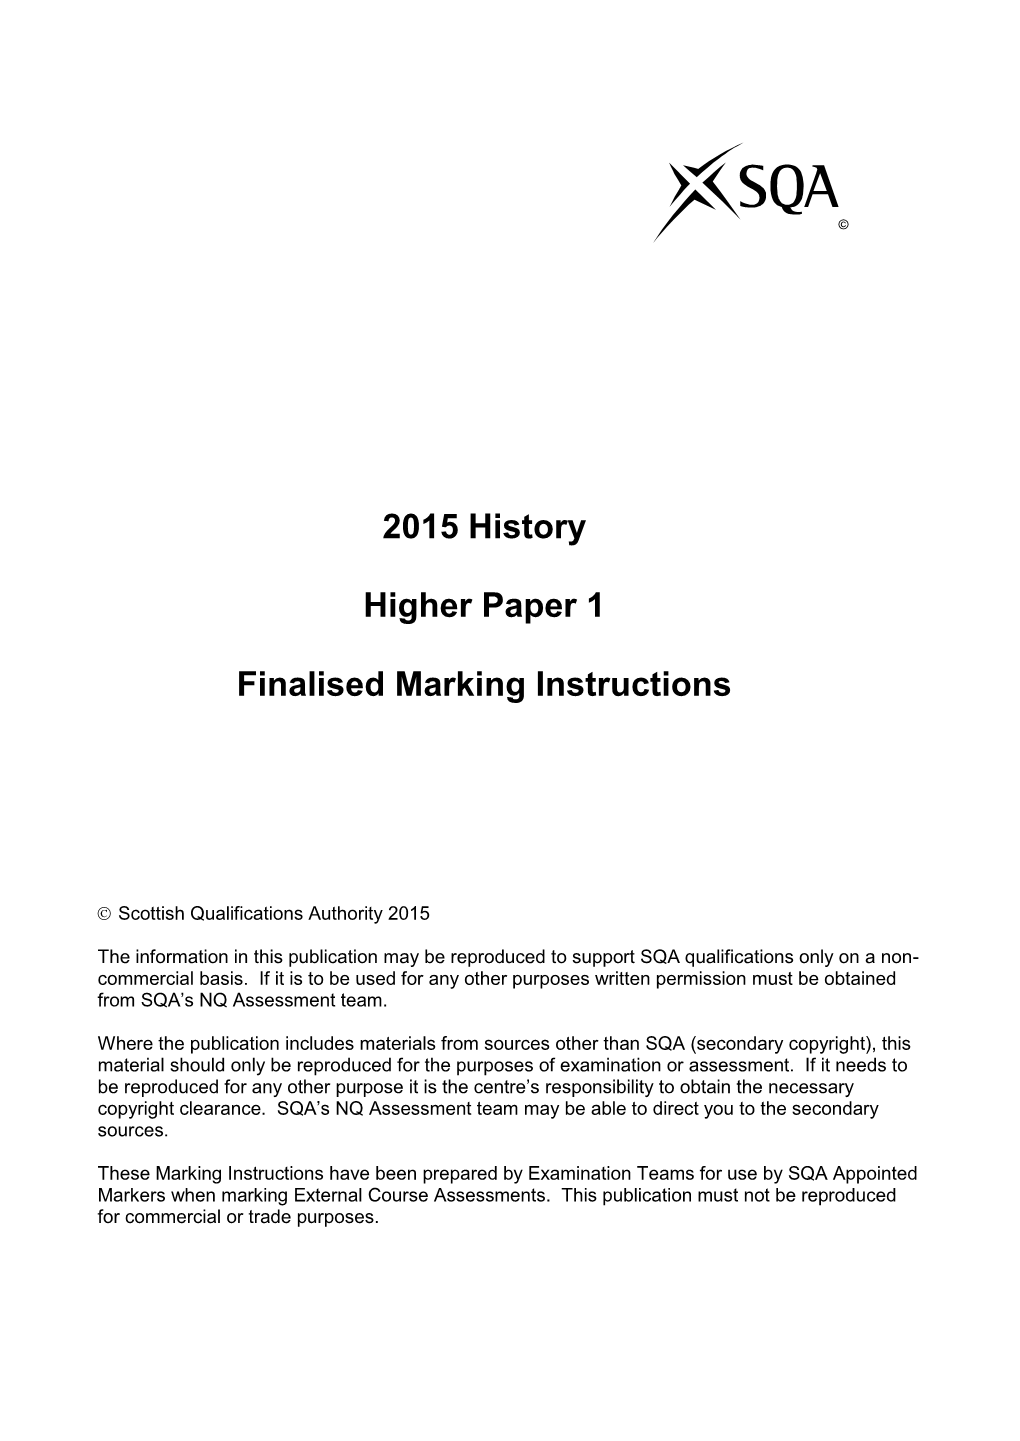 2015 History Higher Paper 1 Finalised Marking Instructions